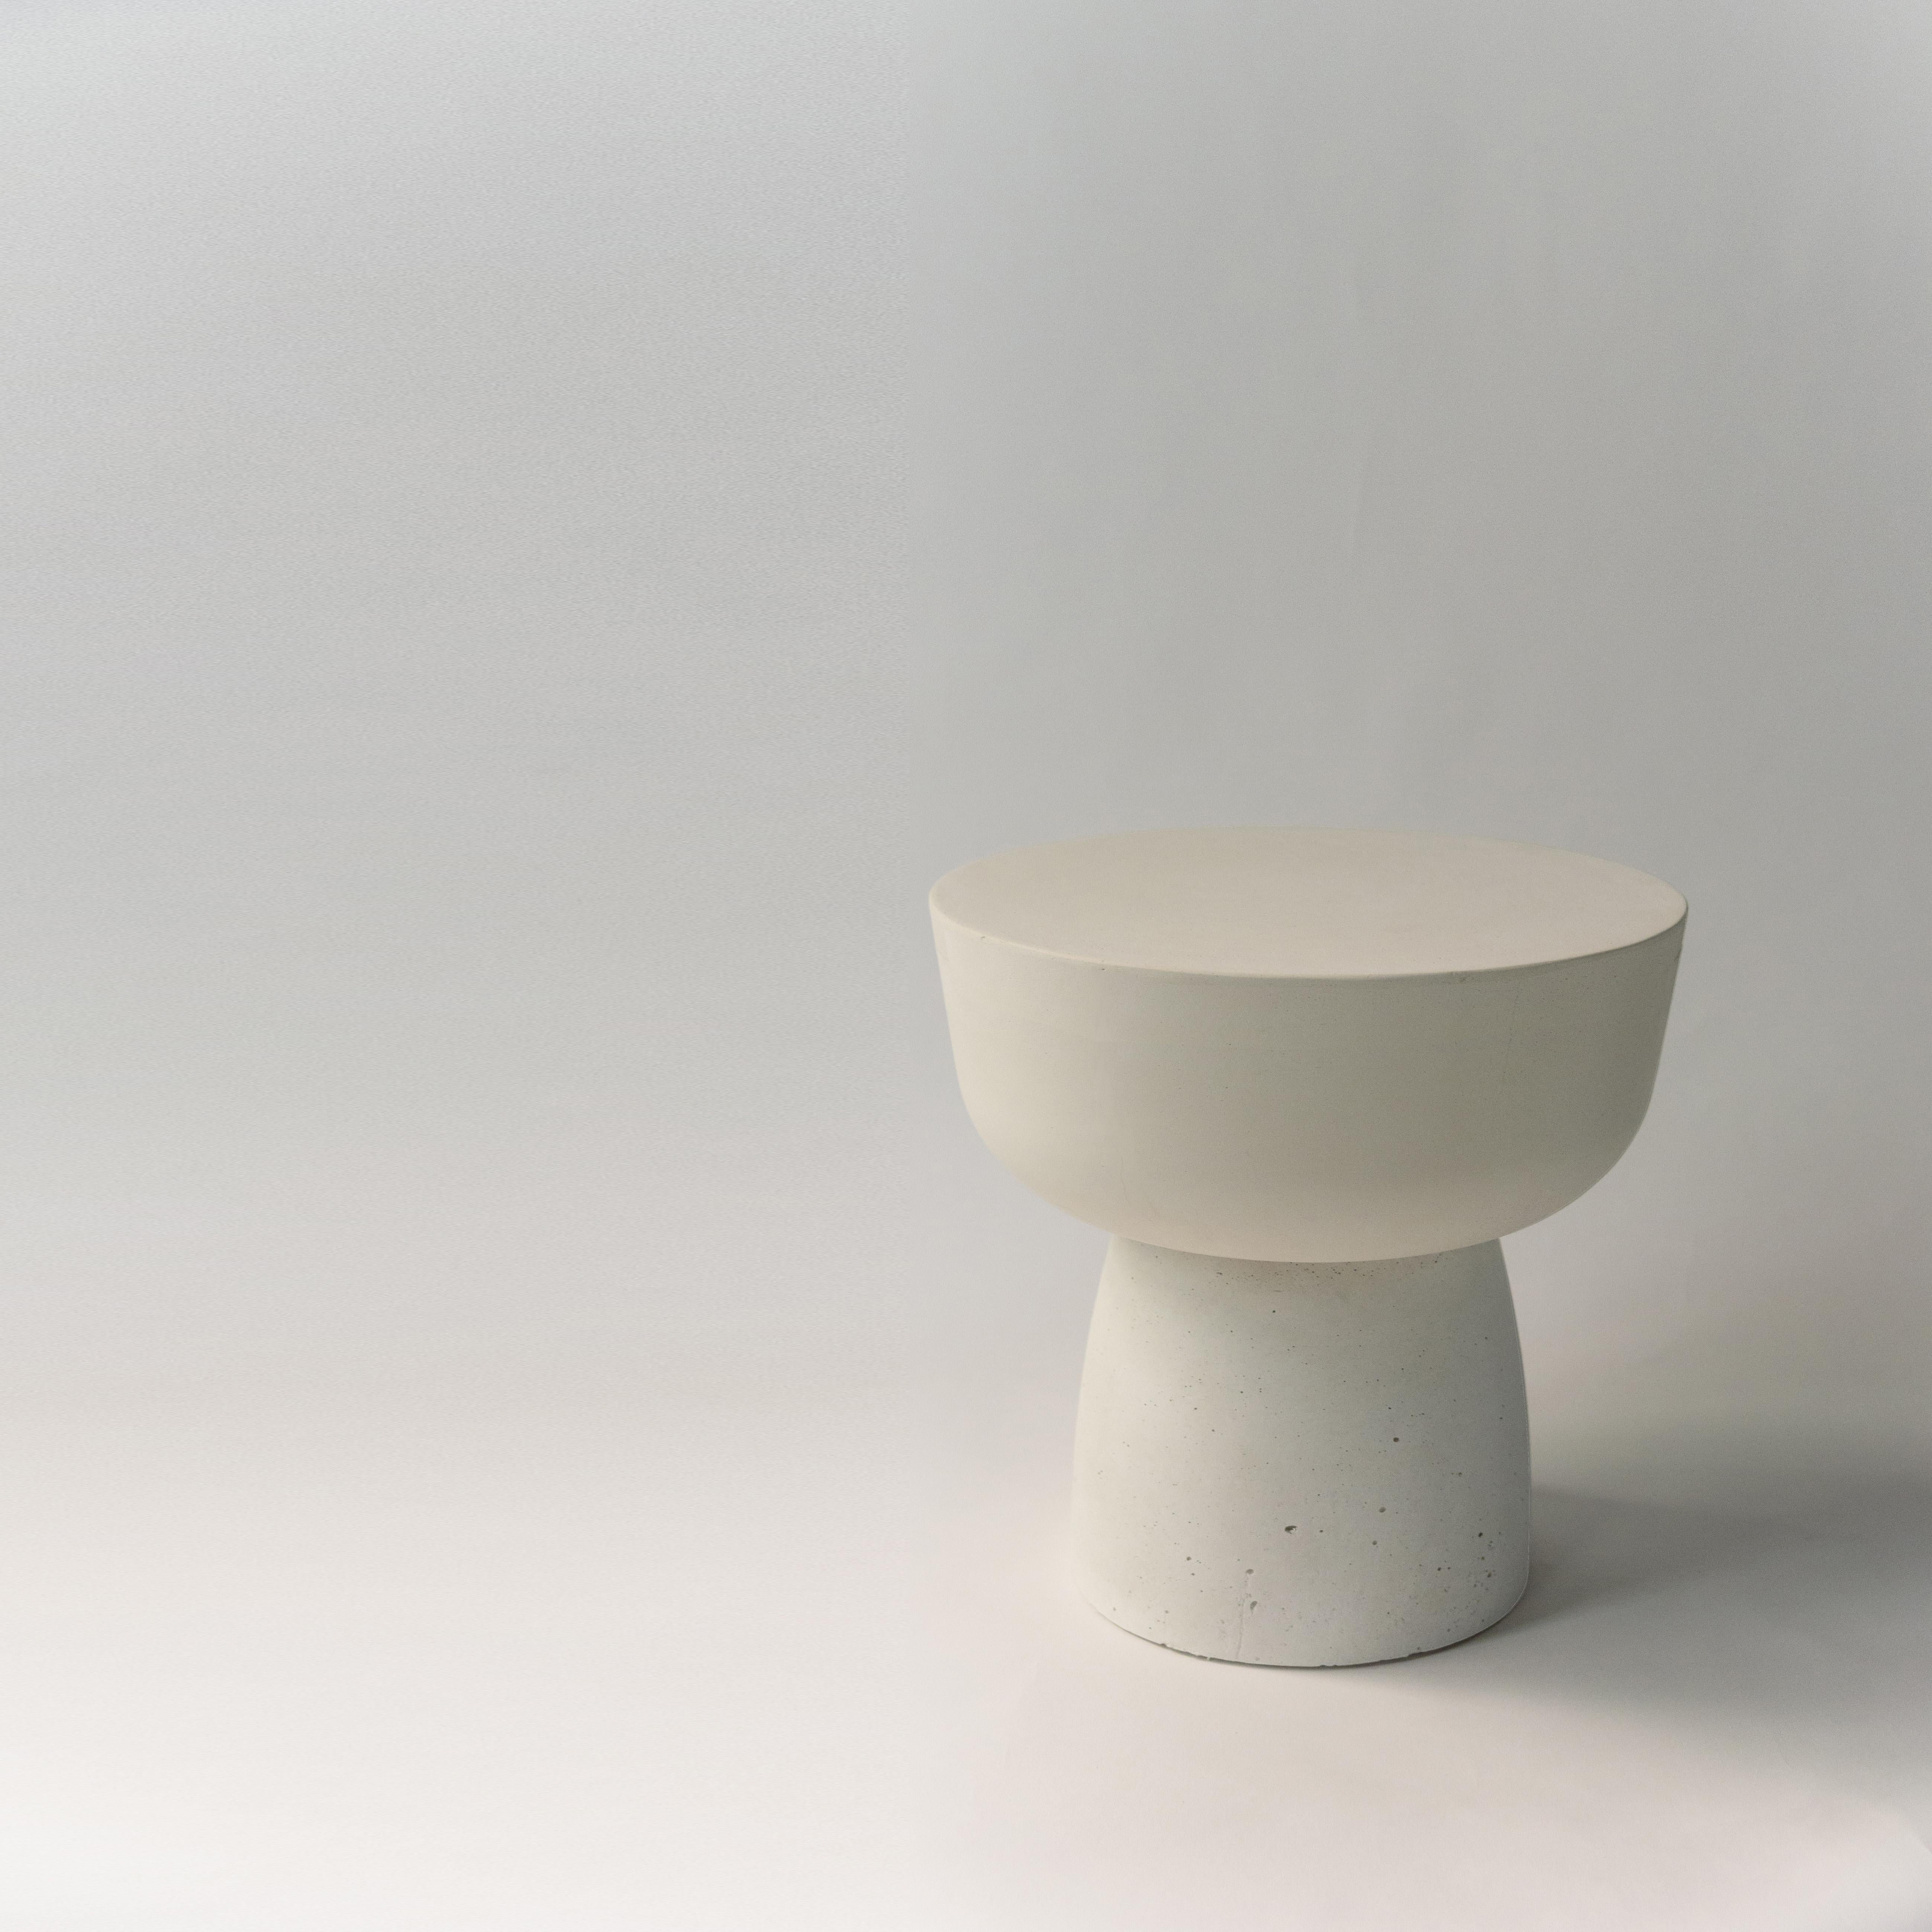 European 21st century contemporary sculptural handmade concrete, marble & stone table 'MUSHROOM SOLID' size low in white.

Mushroom table is part of our mono-material object collection. A rather sculptural piece of furniture, it is both dominant